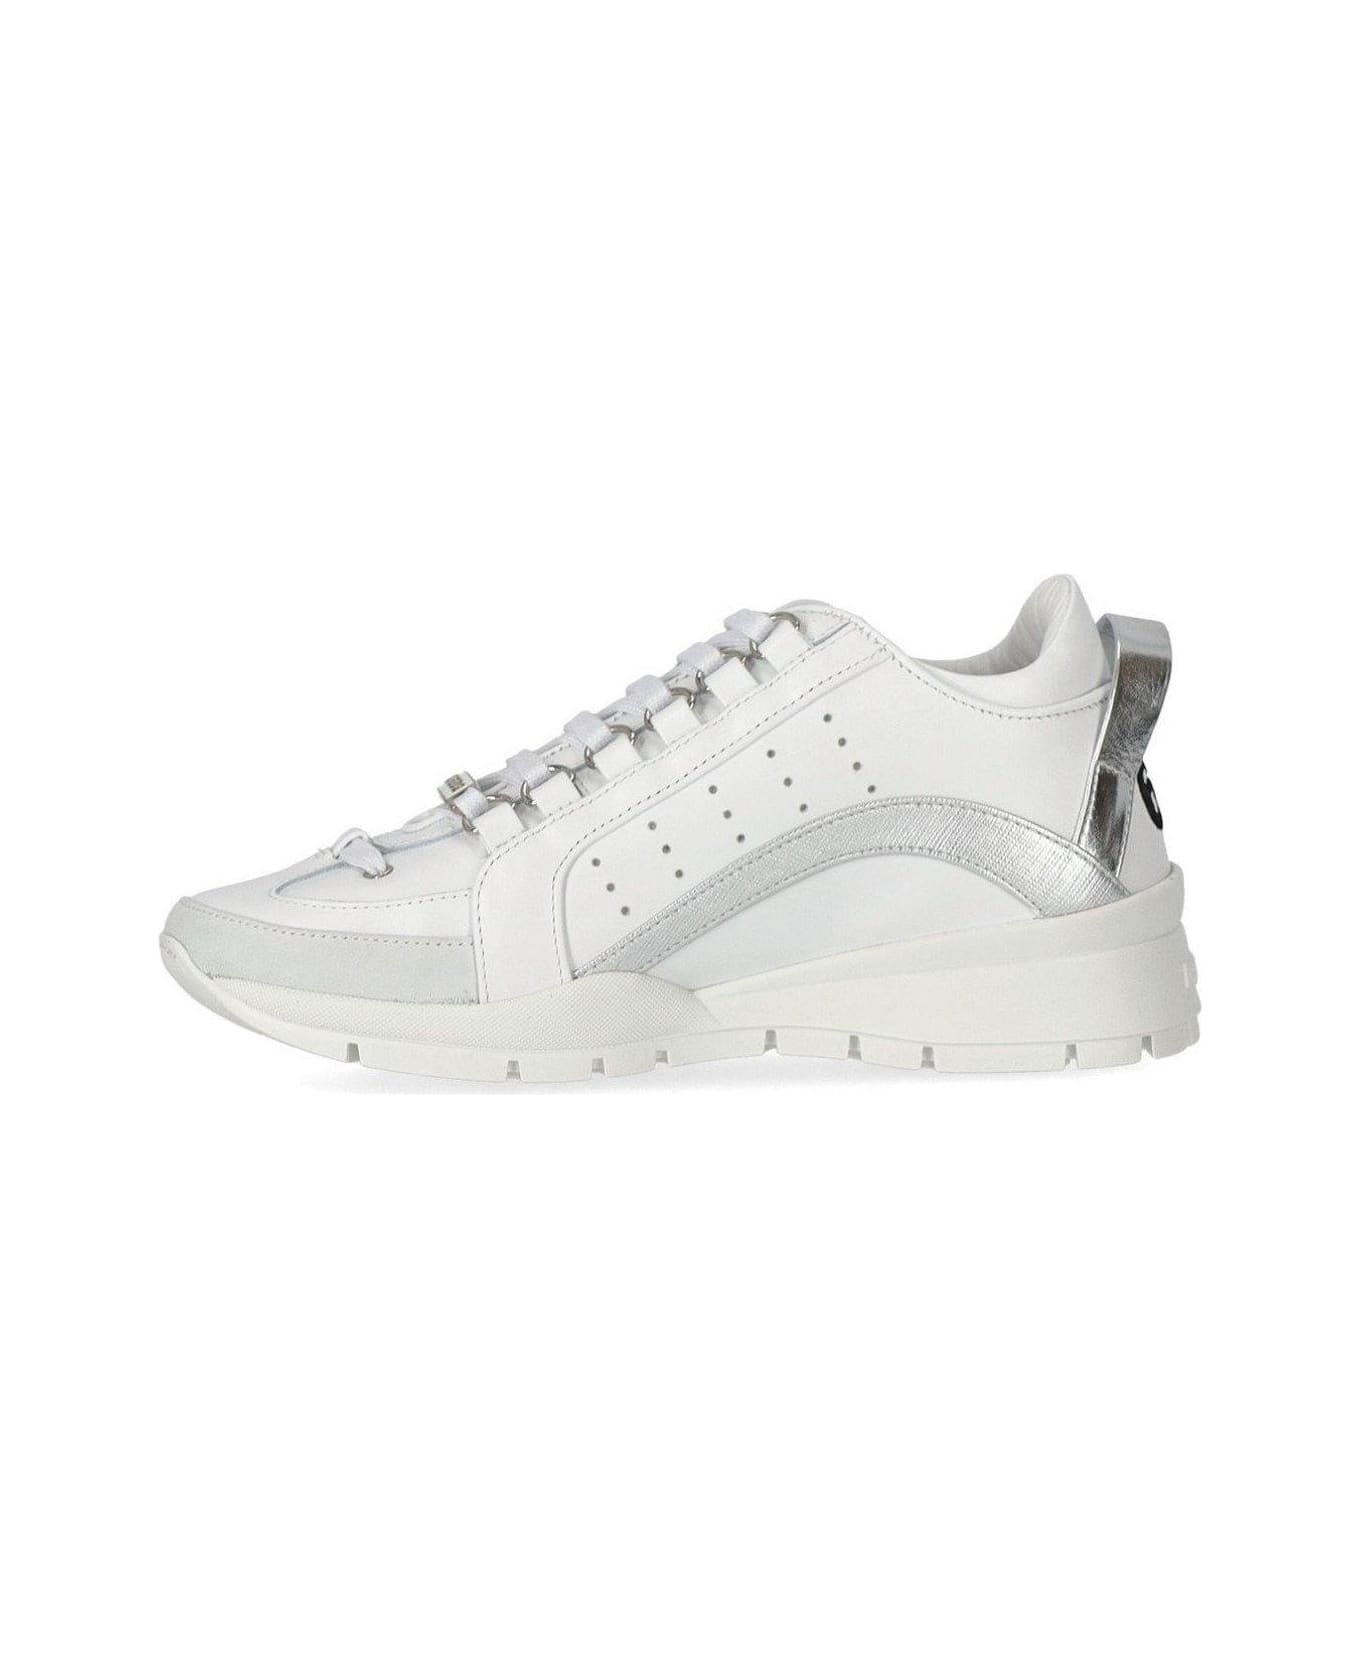 Dsquared2 Logo Embroidered Lace-up Sneakers - Bianco